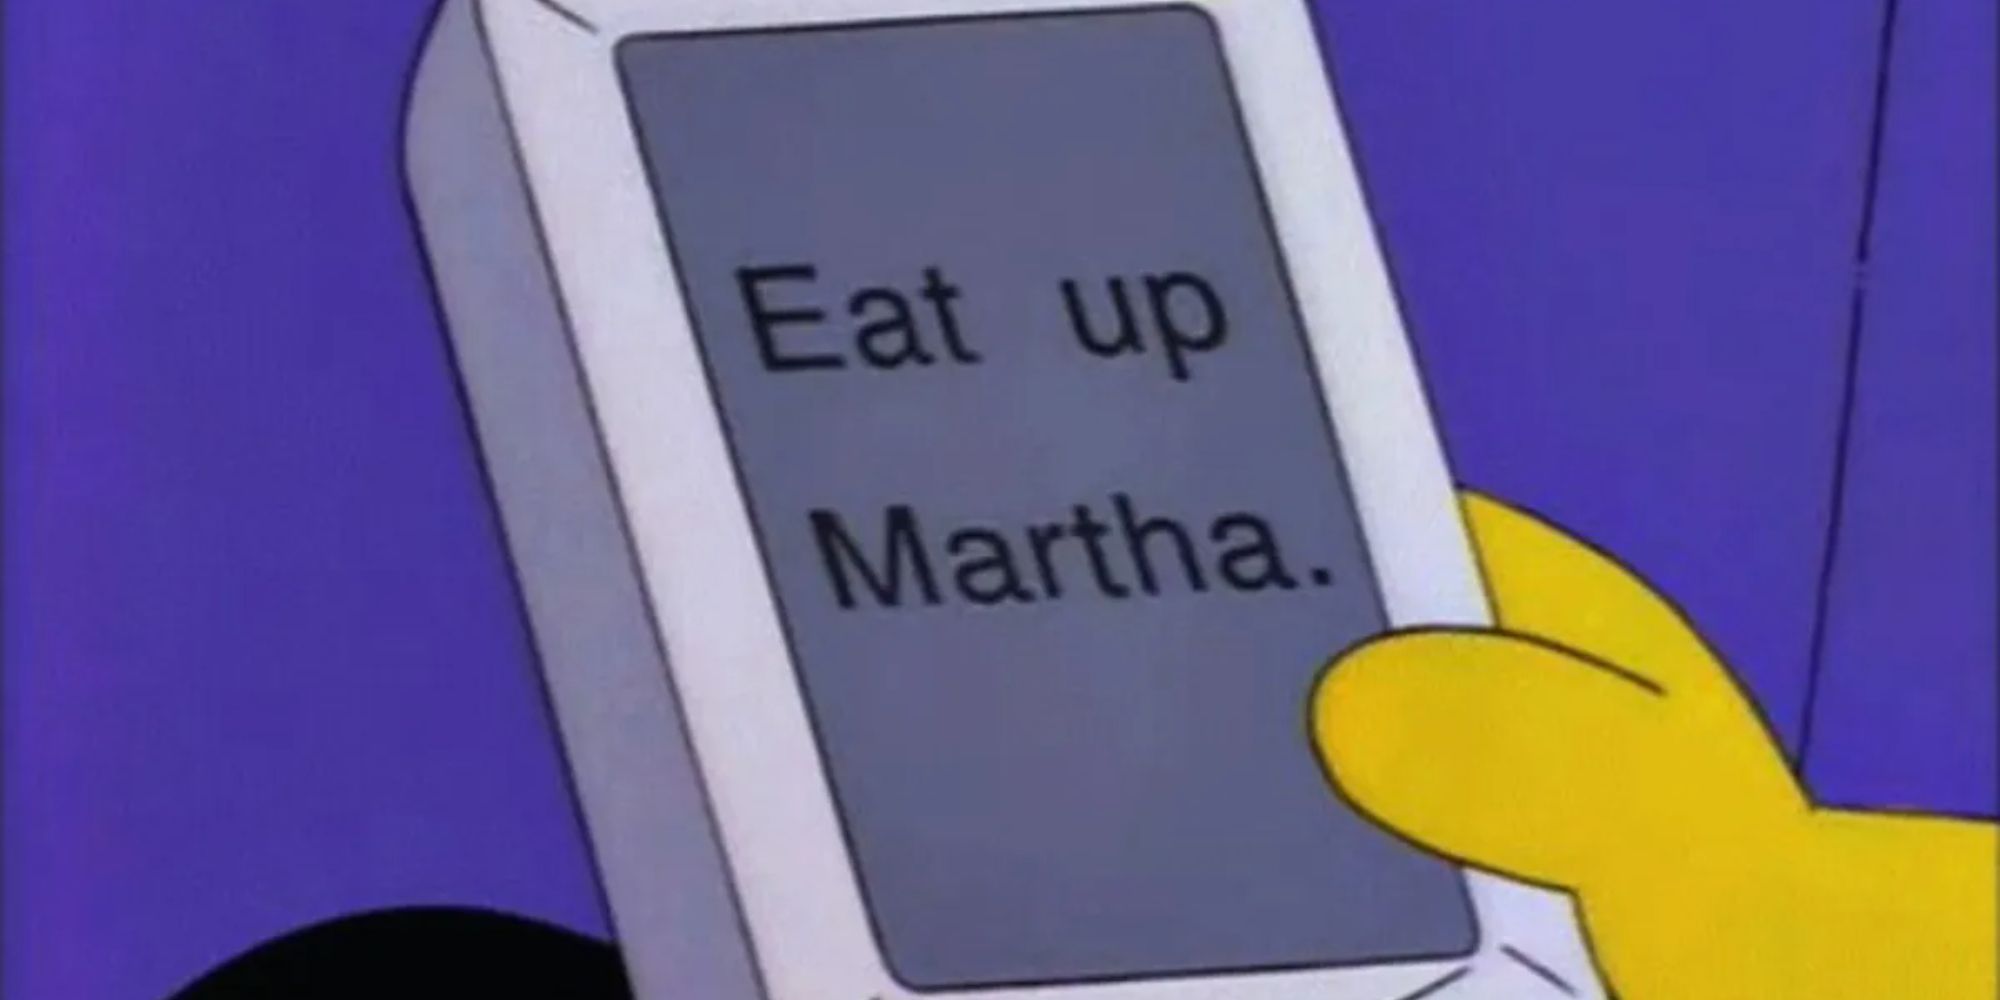 The Newton in The Simpsons